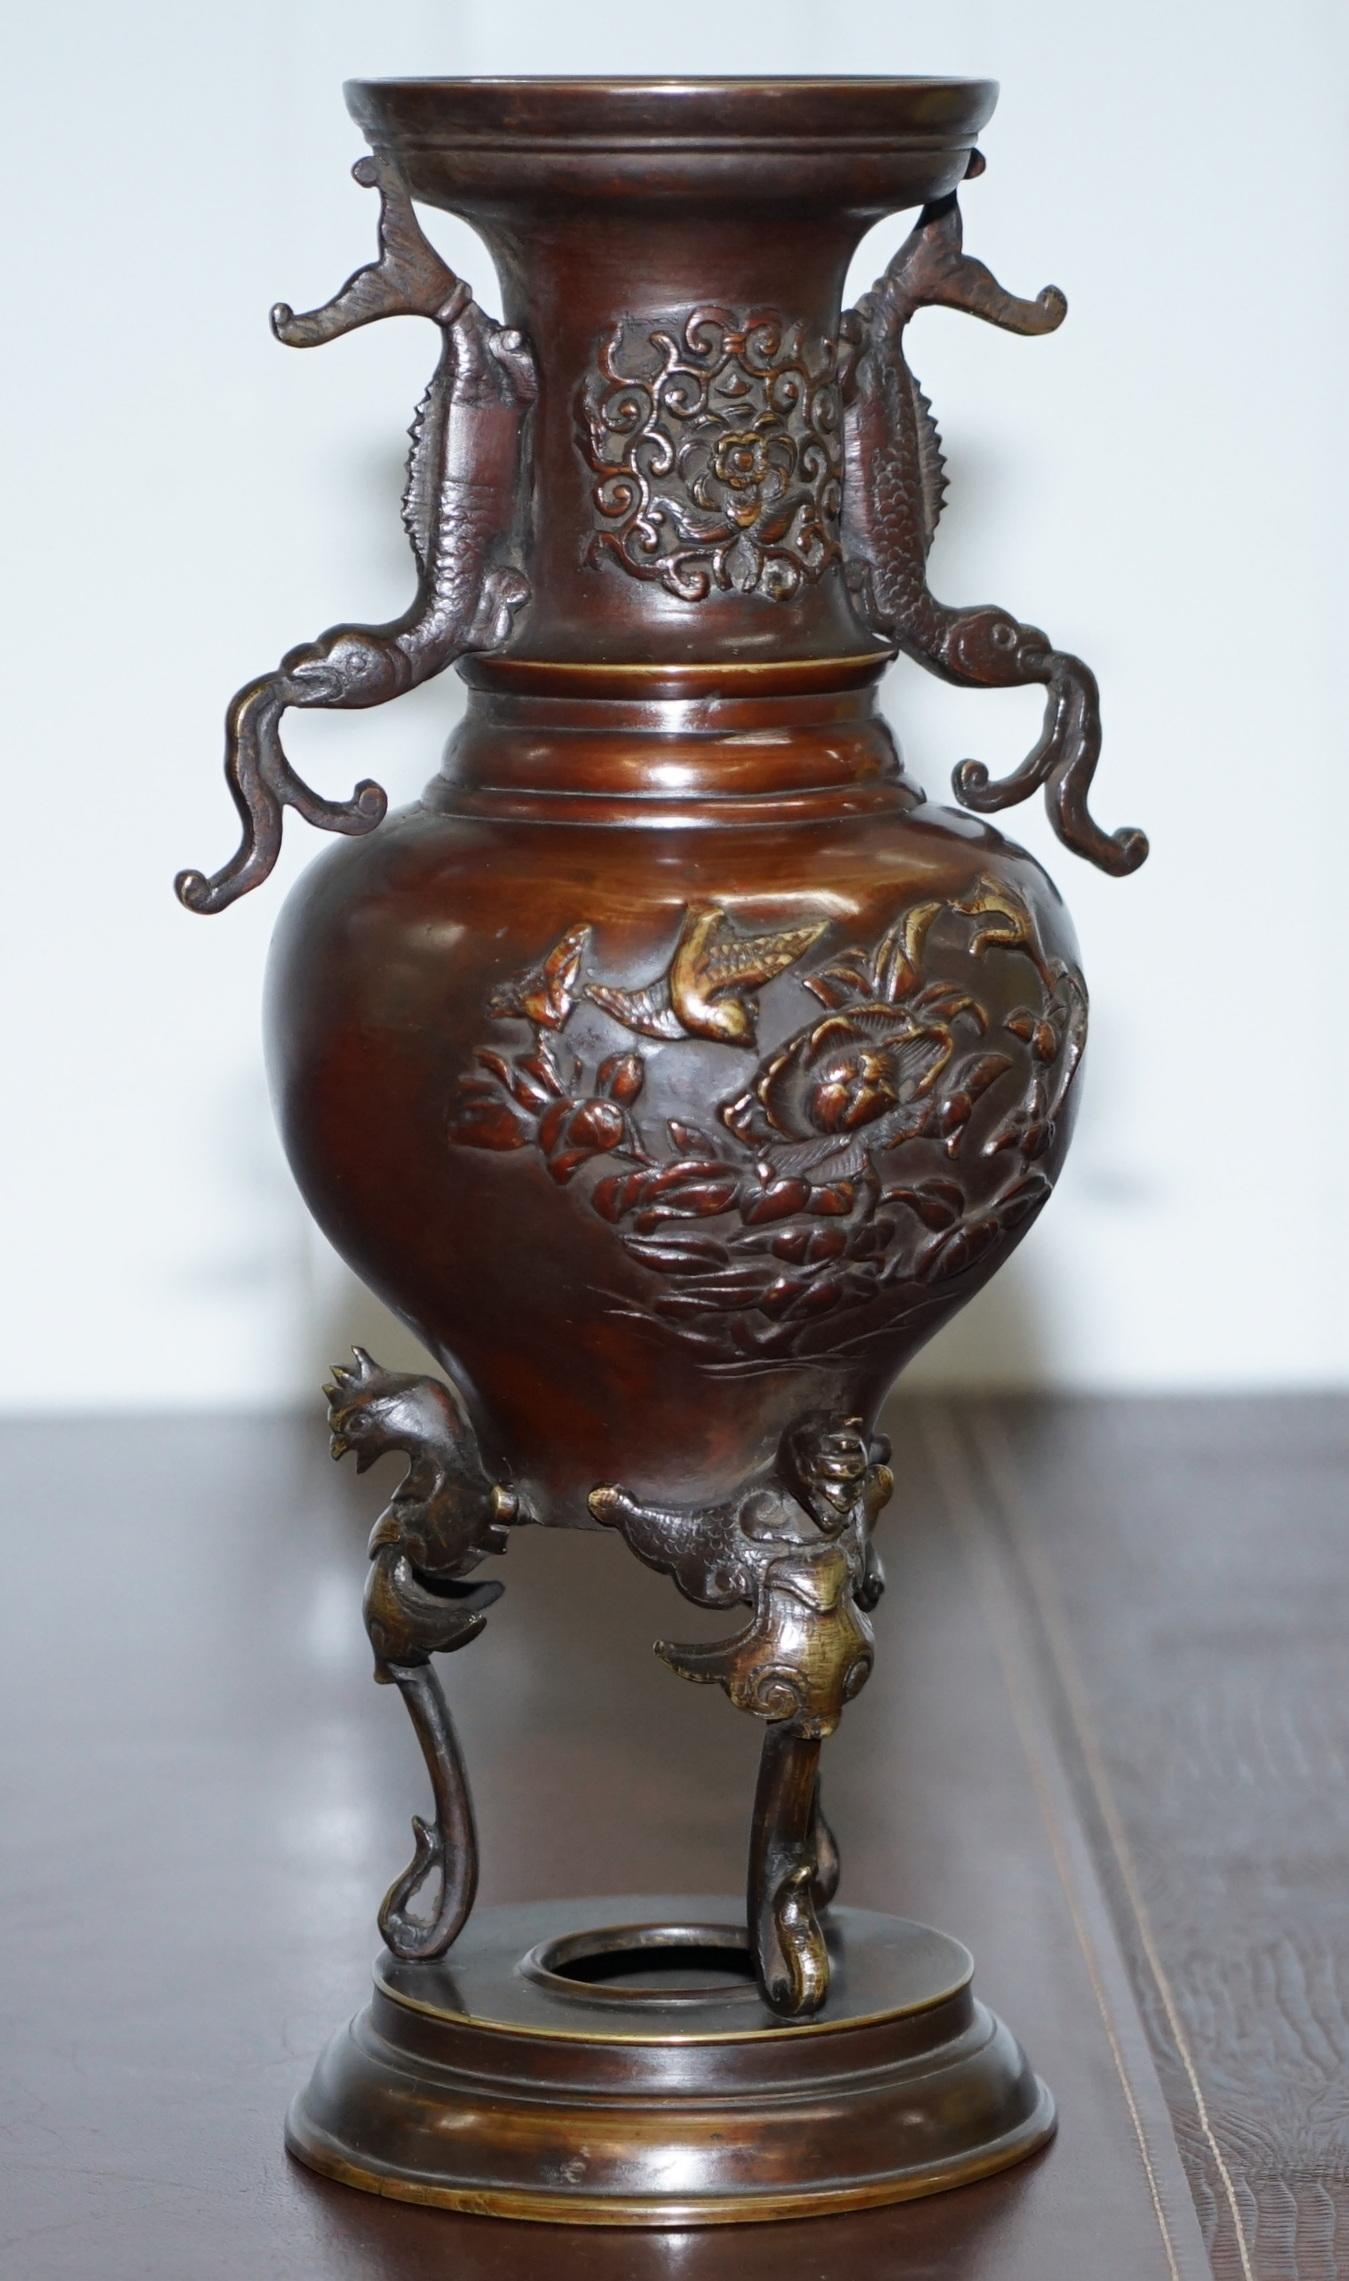 We are delighted to offer for sale this lovely pair of vintage oriental bronze urn vases depicting birds and serpents.

A good looking and decorative pair in lovely order throughout, these are export pieces so made for the export market most